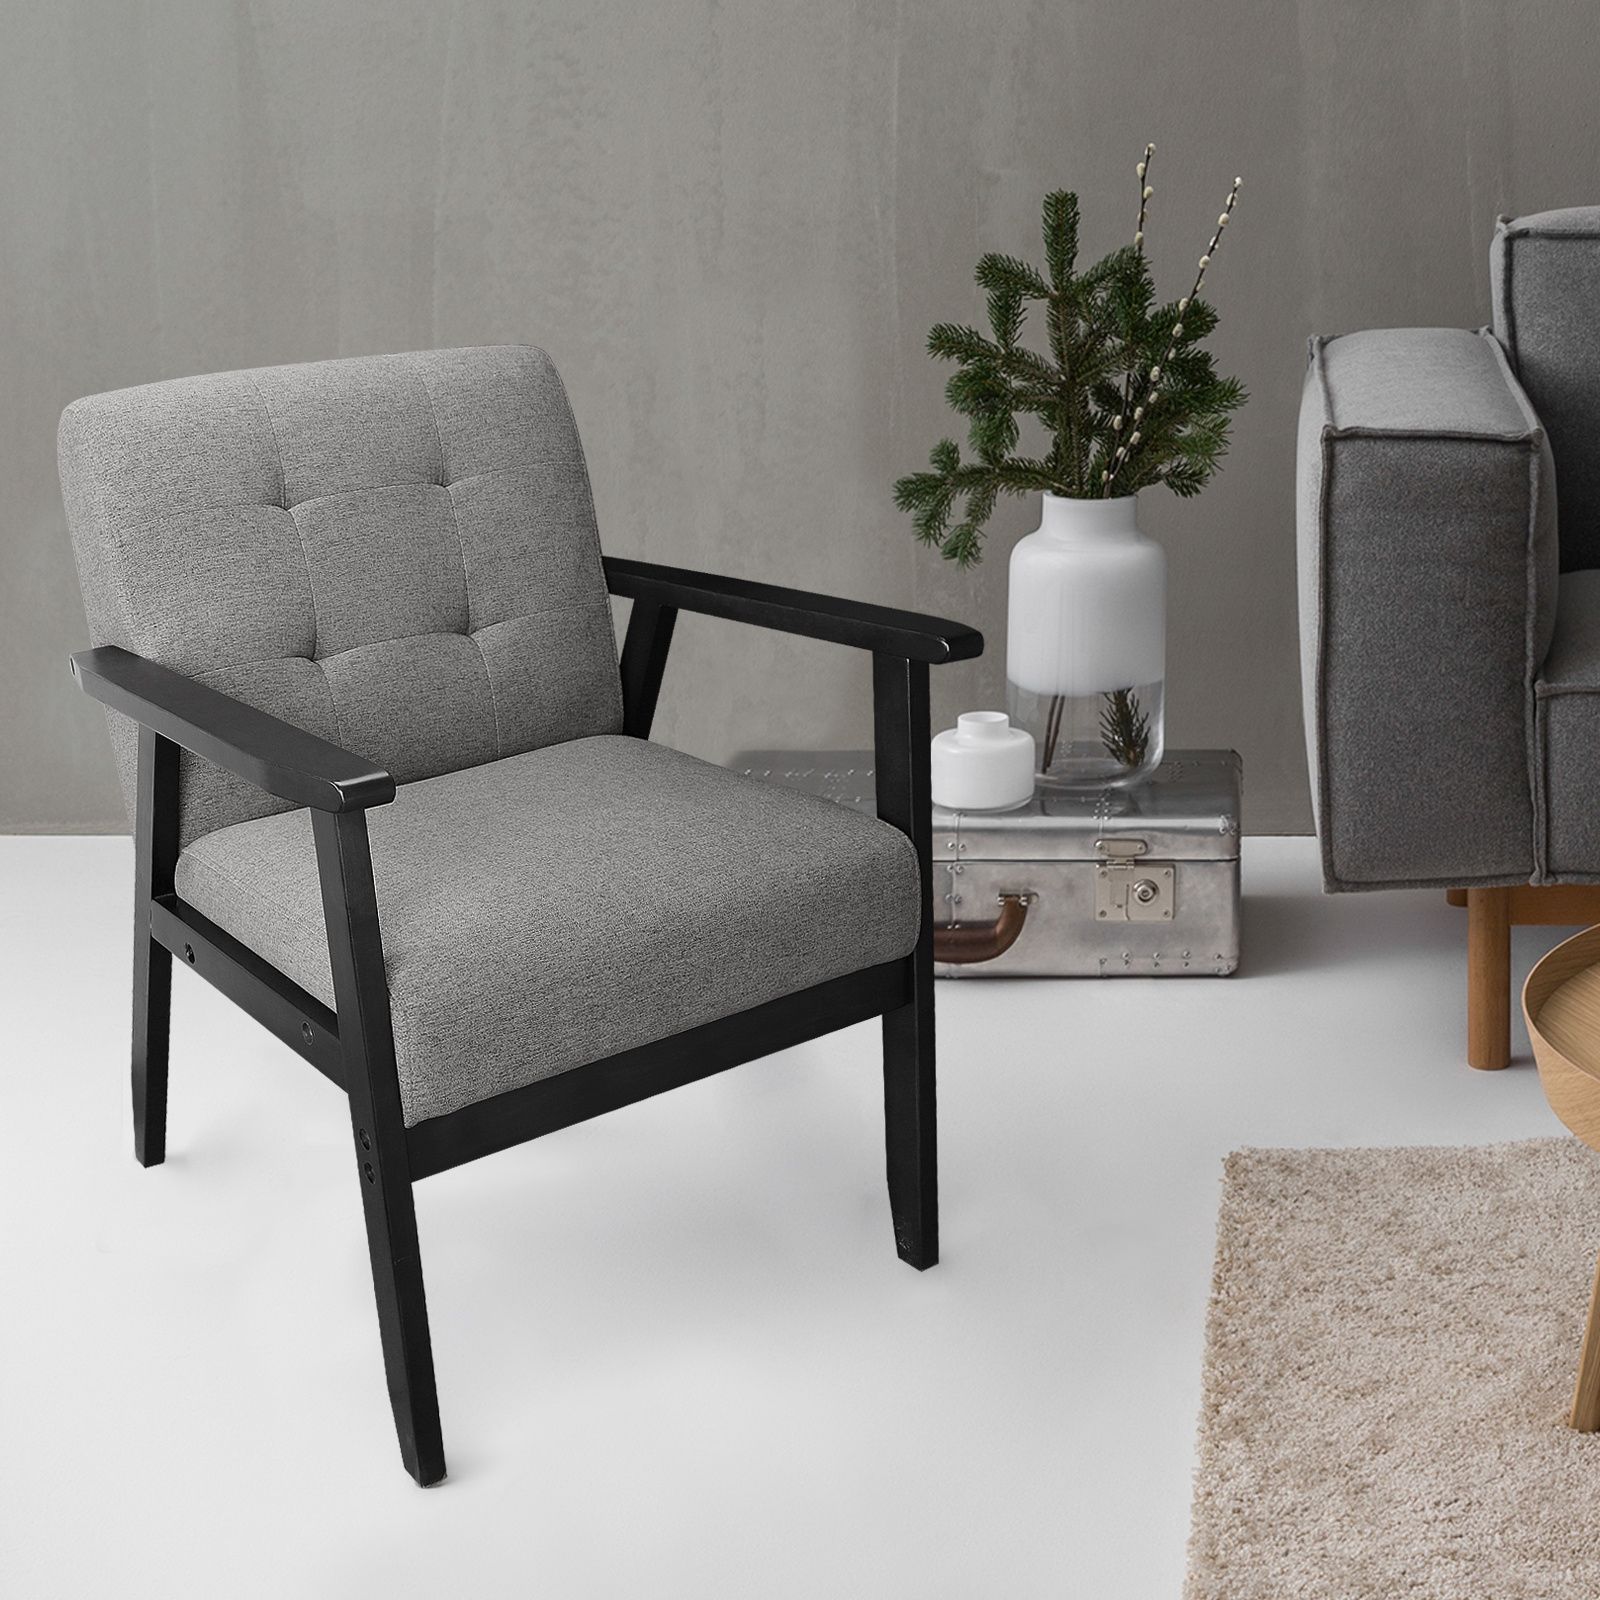 Dazone Modern Accent Fabric Chair Single Sofa Comfy Upholstered Arm With Current Smoke Gray Wood Accent Stools (View 5 of 10)